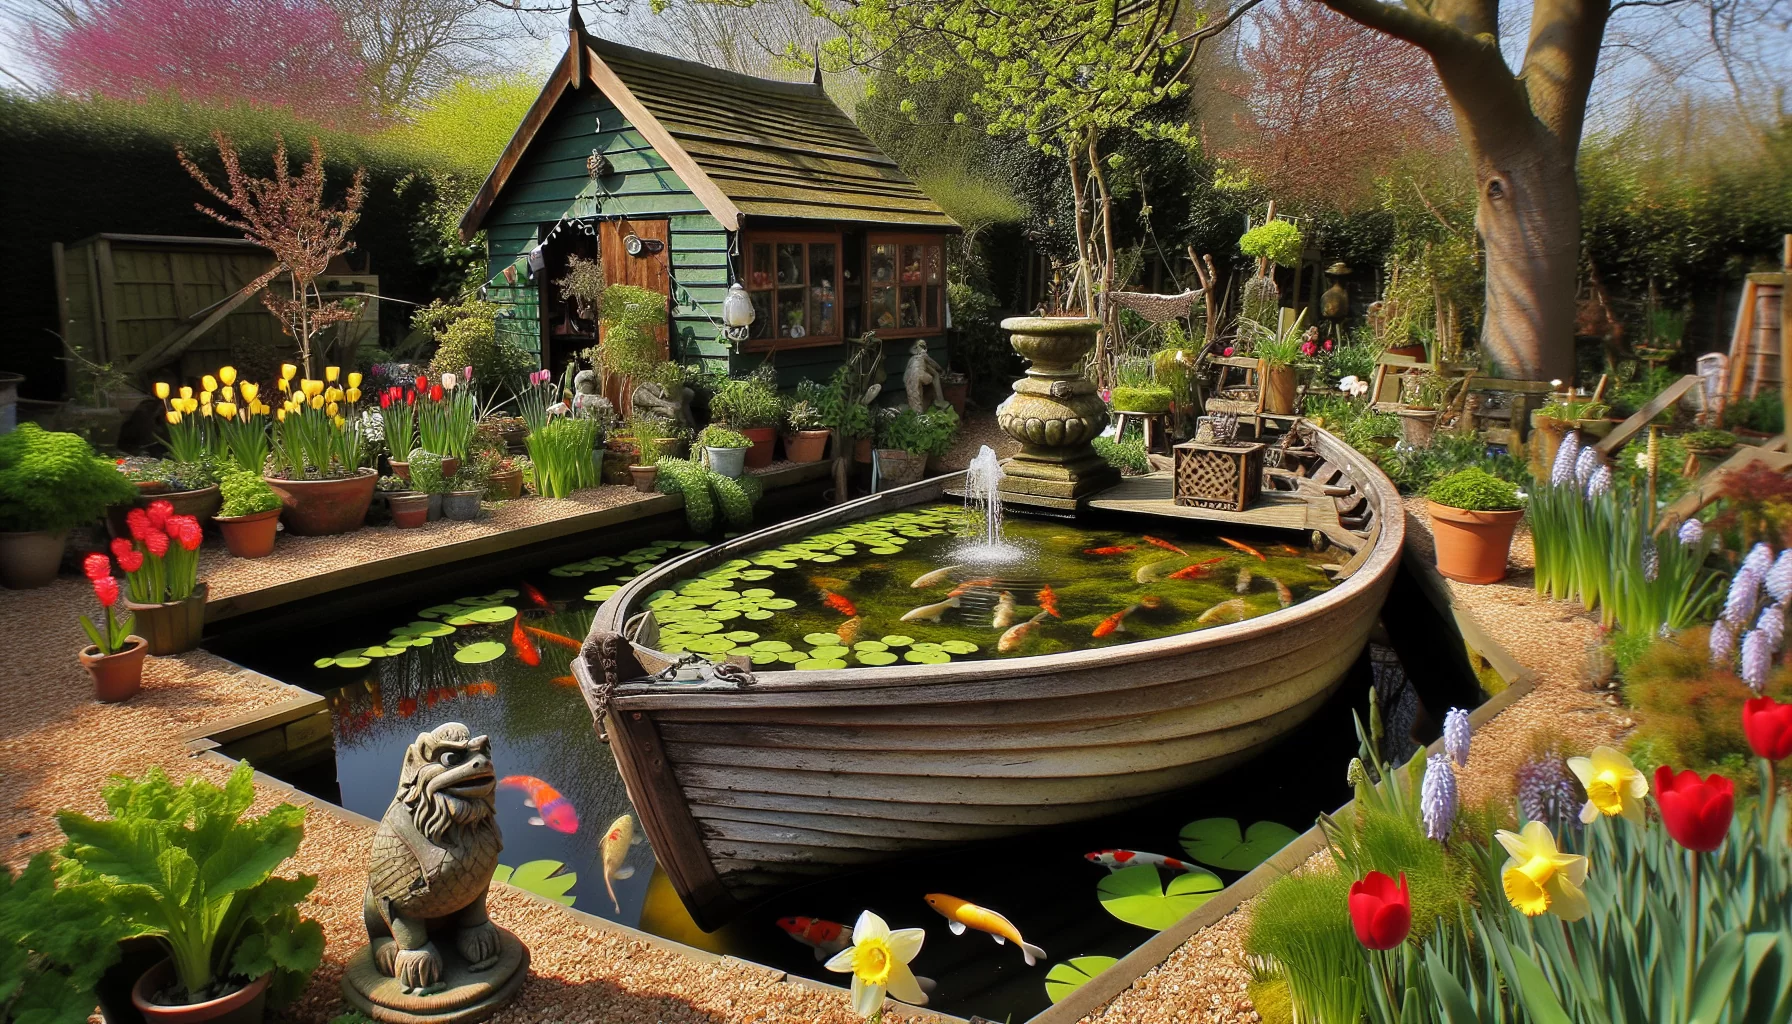 Reviving old boats into striking garden ponds: a unique DIY upcycling project